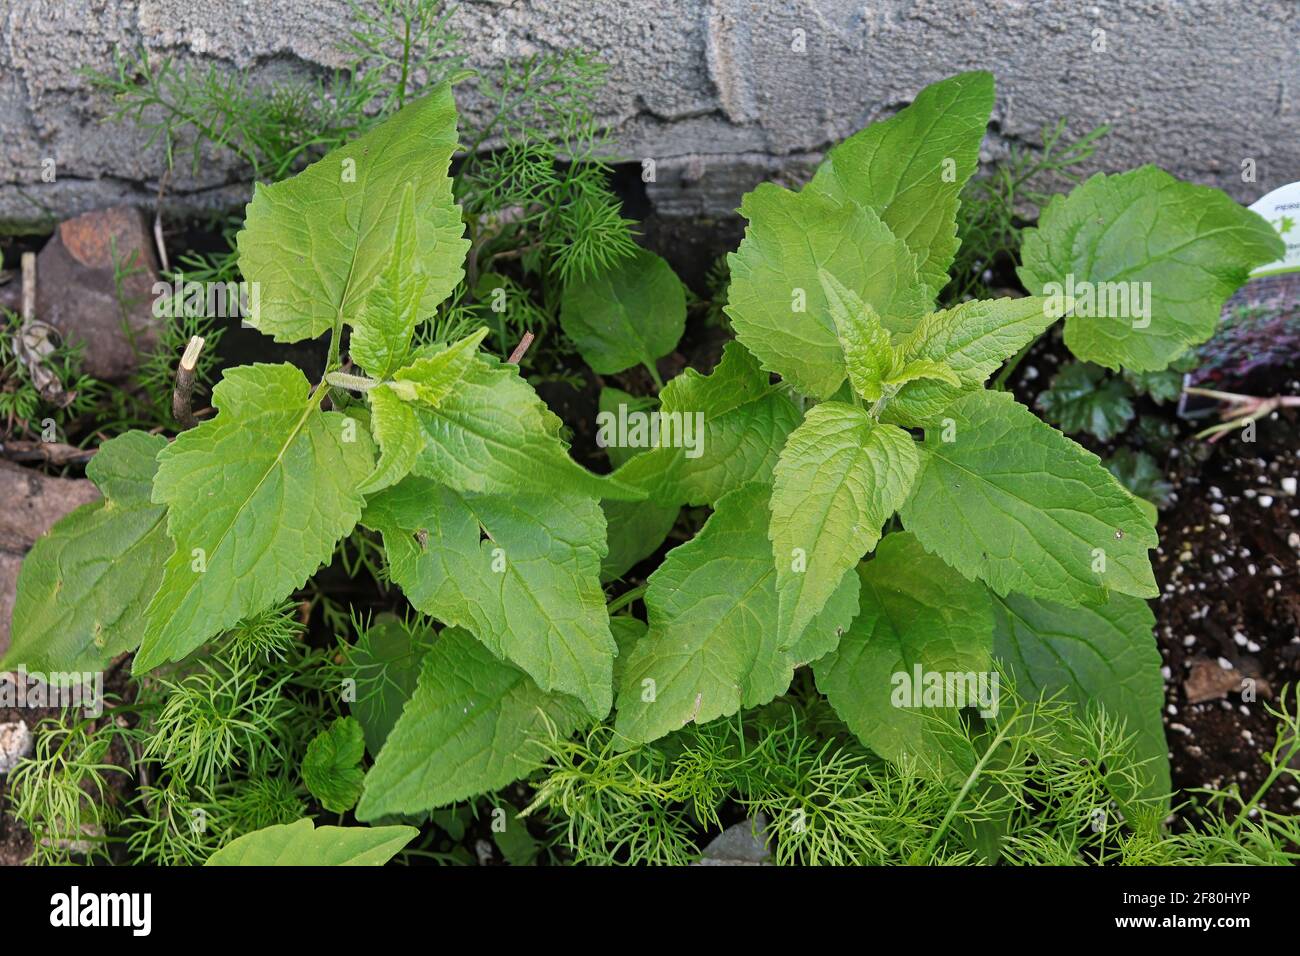 Leaves of the creeping belldflower, an invasive weed Stock Photo